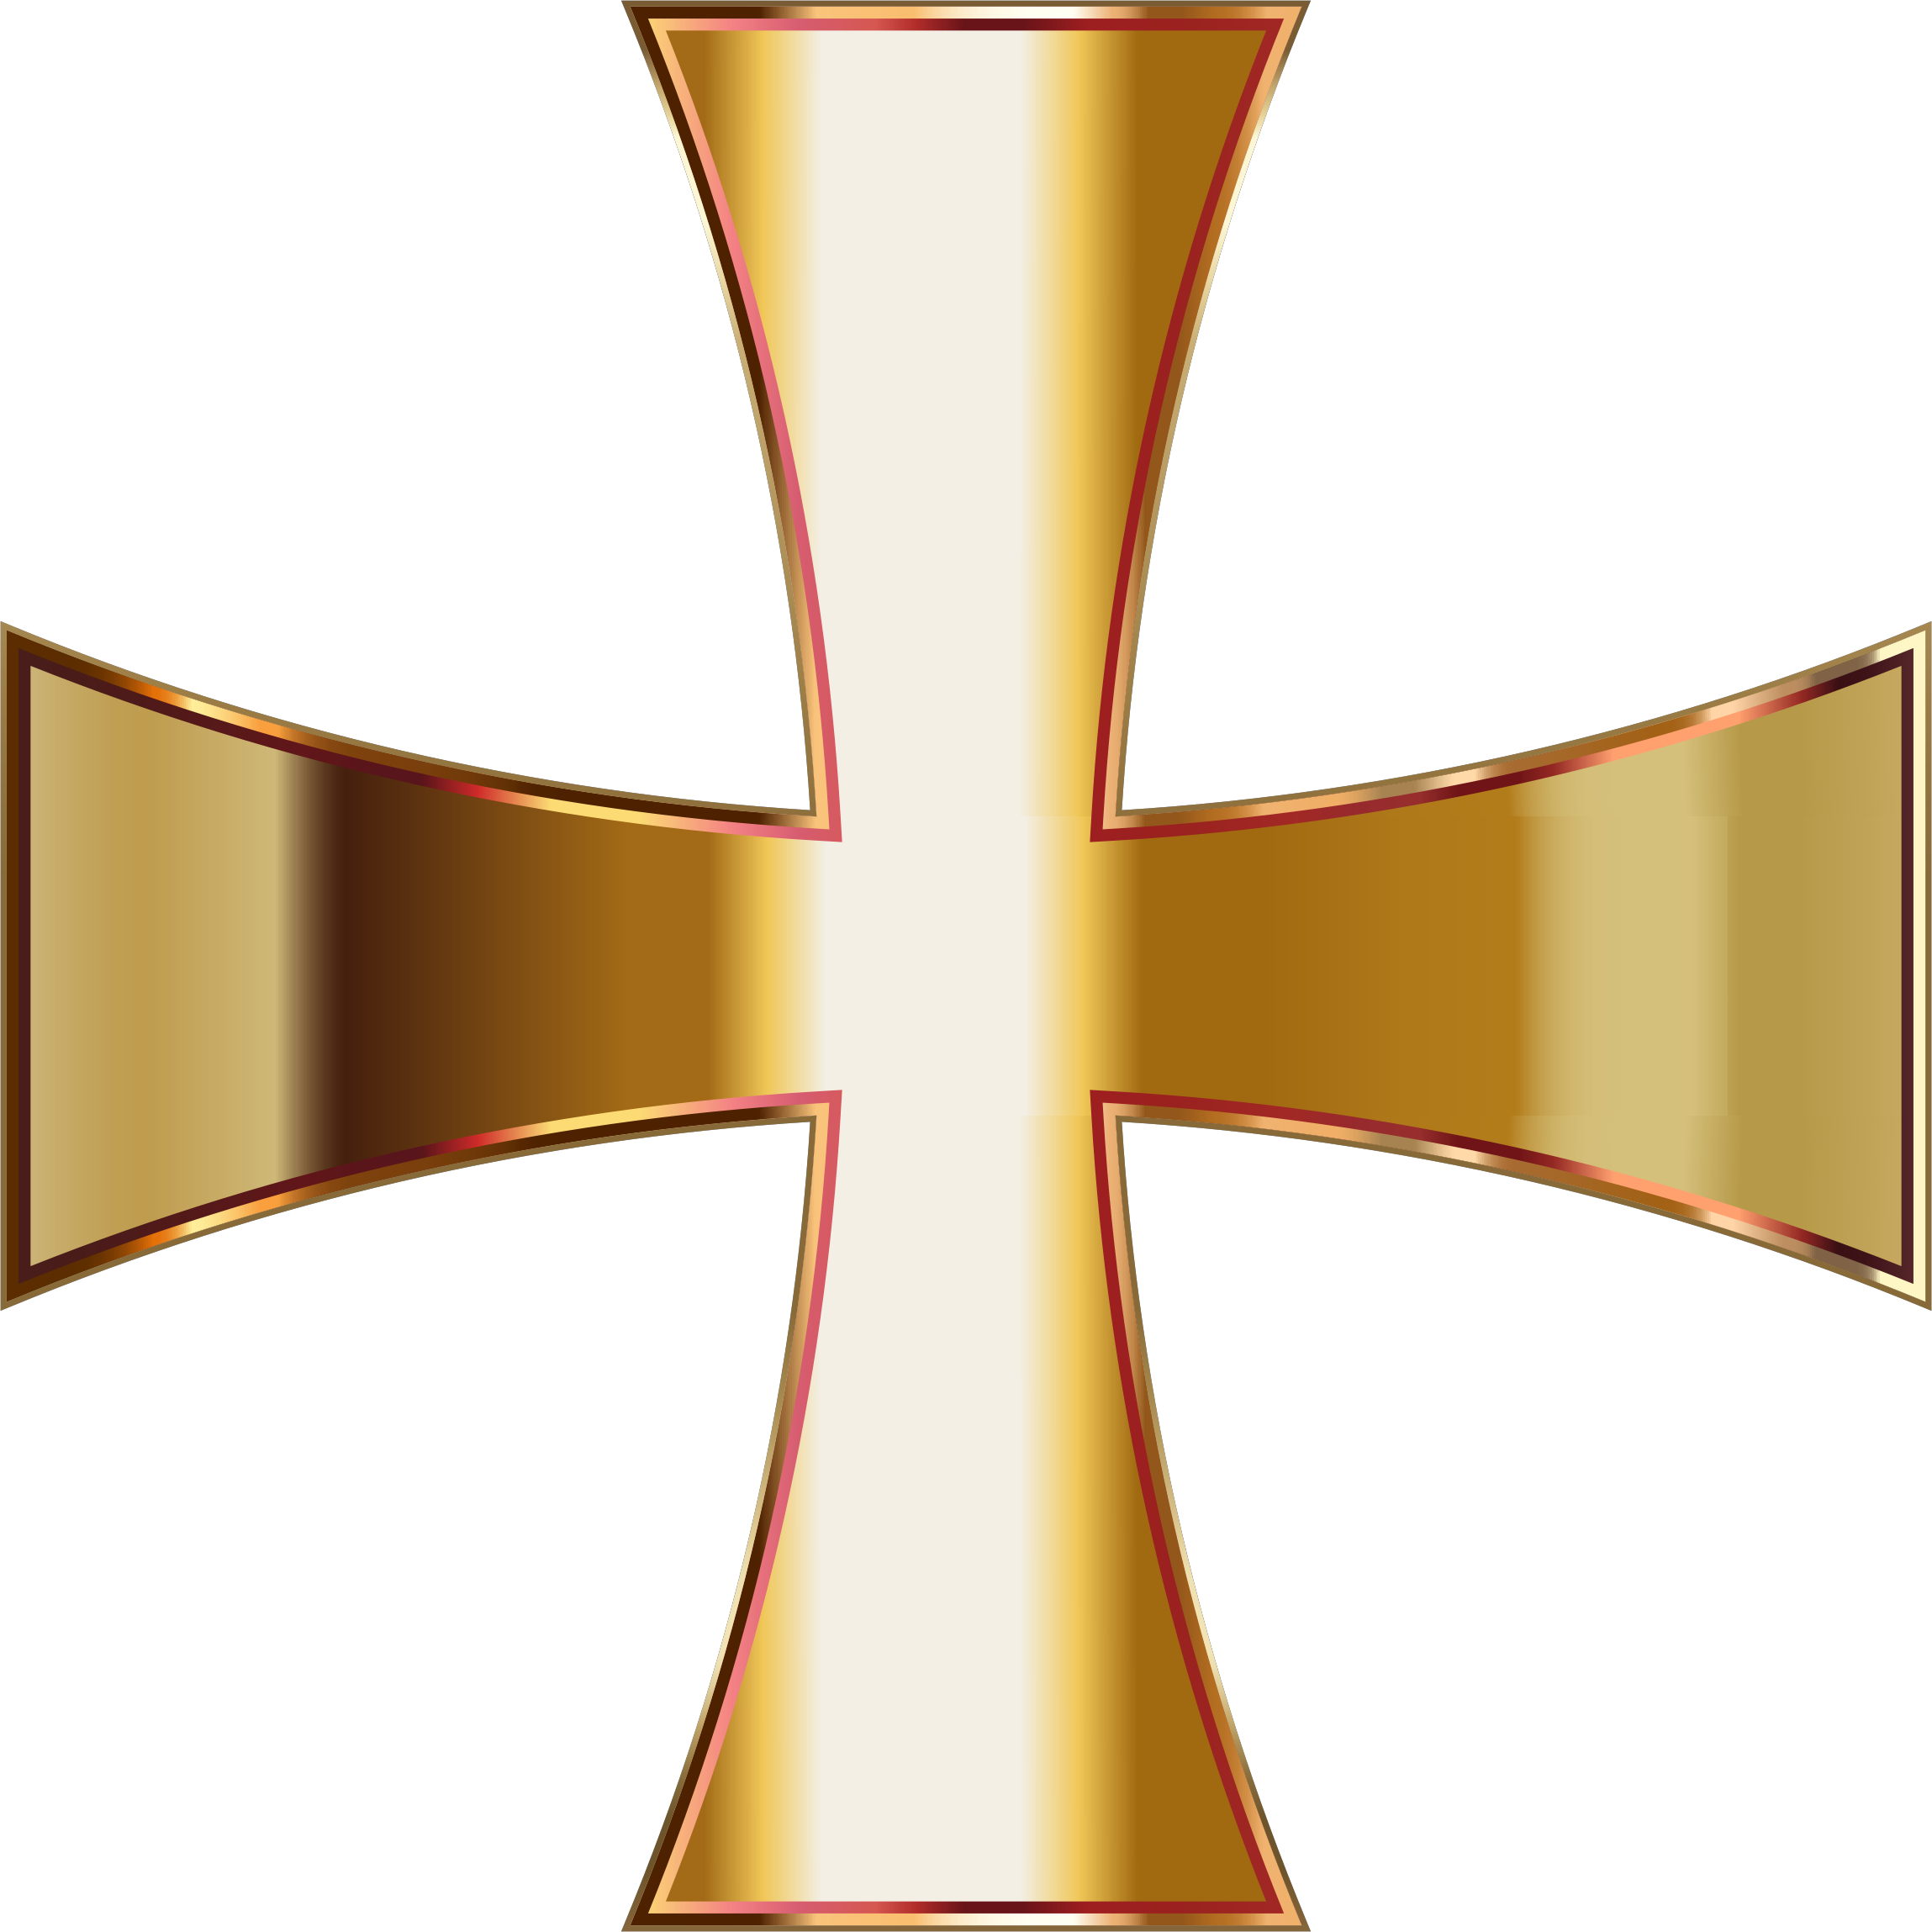 Medium Image - Gold Cross No Background Clipart, free png download.